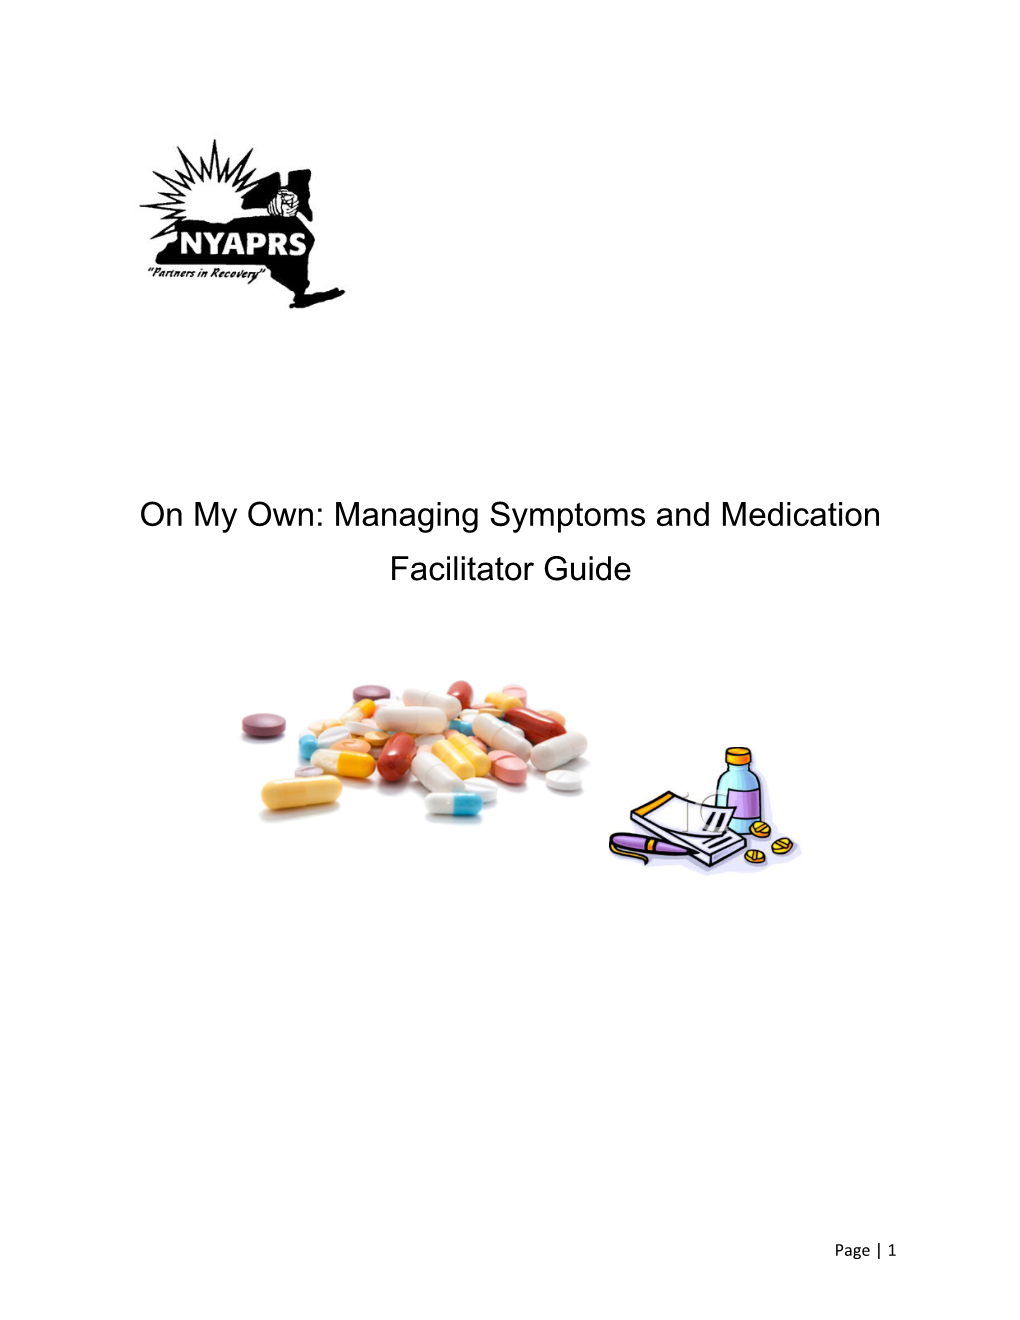 On My Own: Managing Symptoms and Medication